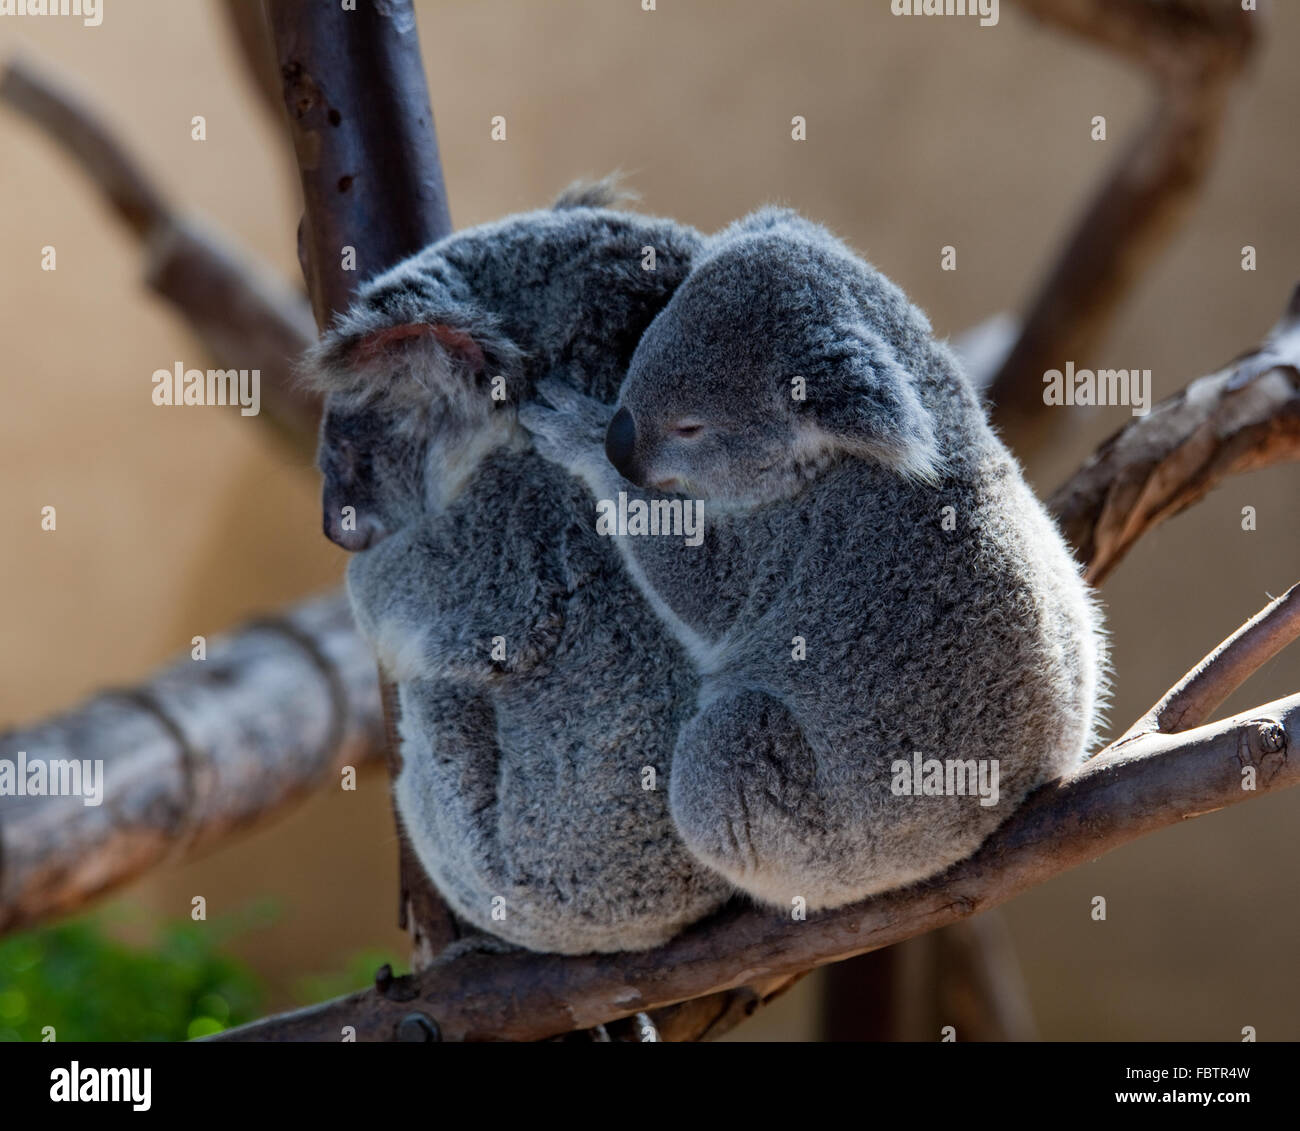 Australian Koala bears cuddling on a branch with the baby behind the mother bear Stock Photo